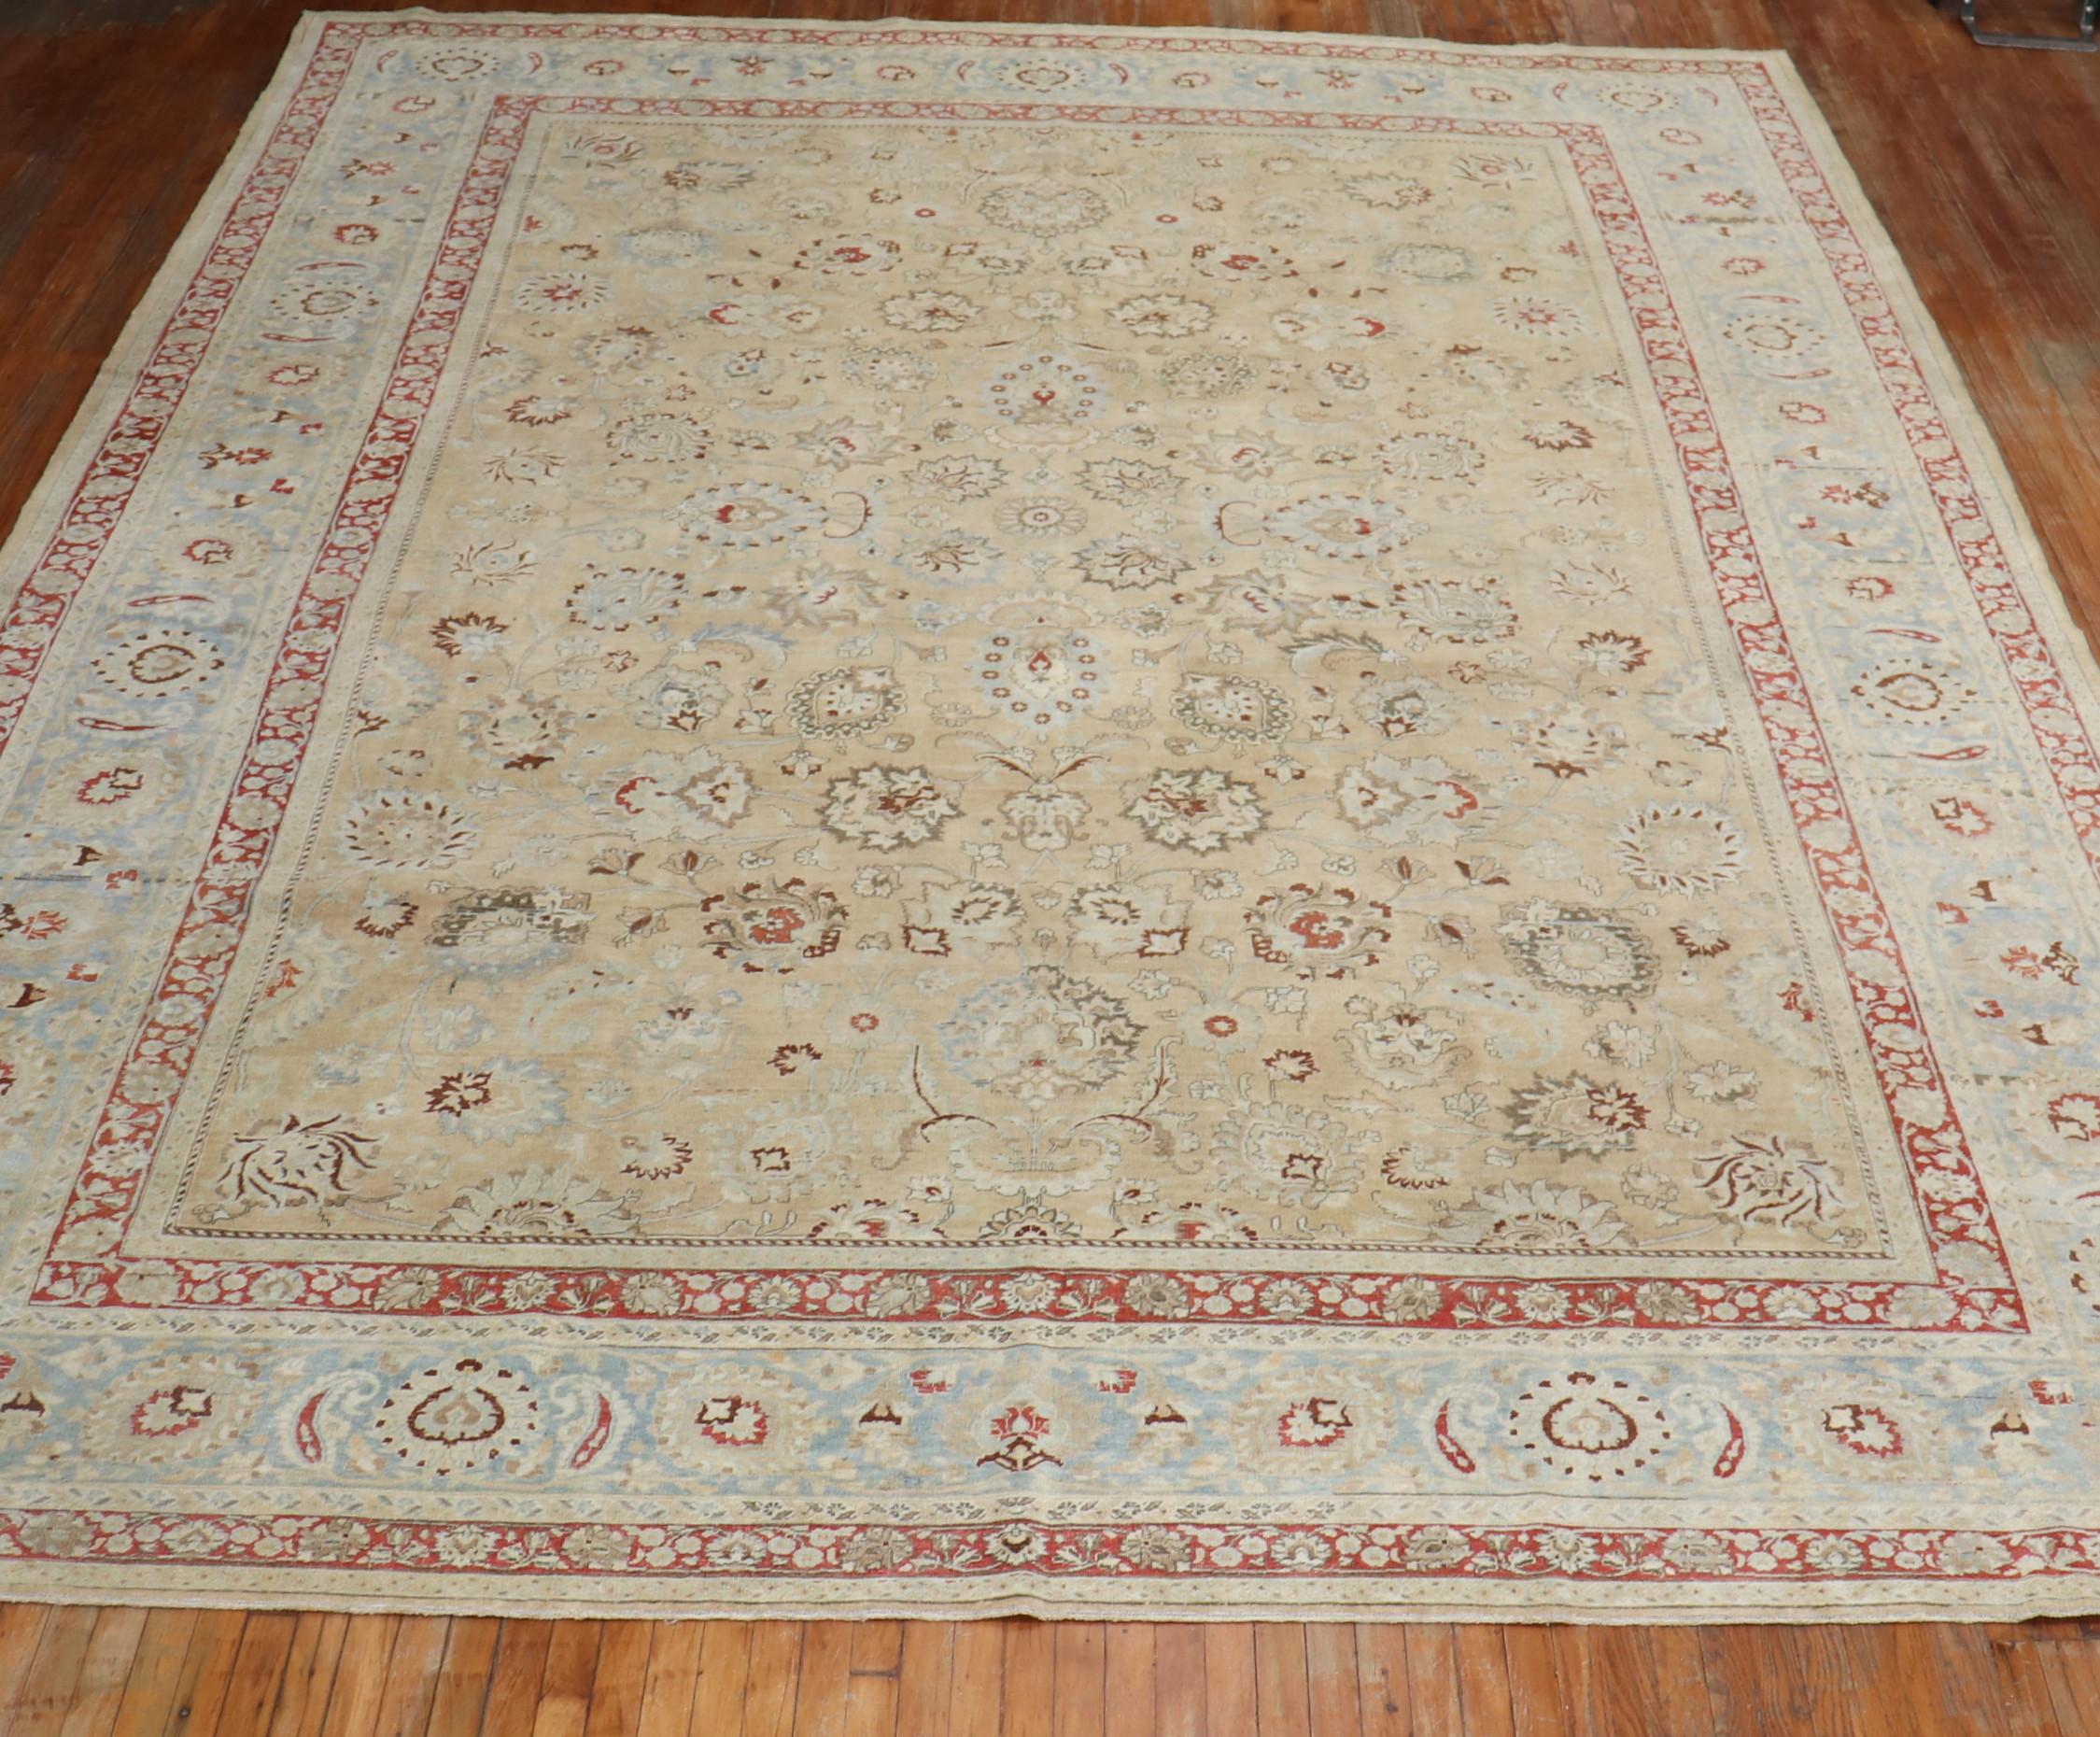 An oversize Persian Meshed rug with an all-over formal design on a khaki field, an icy blue border, accent colors in red and brown, circa 1920.

Measures: 12'2'' x 16'8''

The city of Meshed is one of Iran's oldest cities, located in the